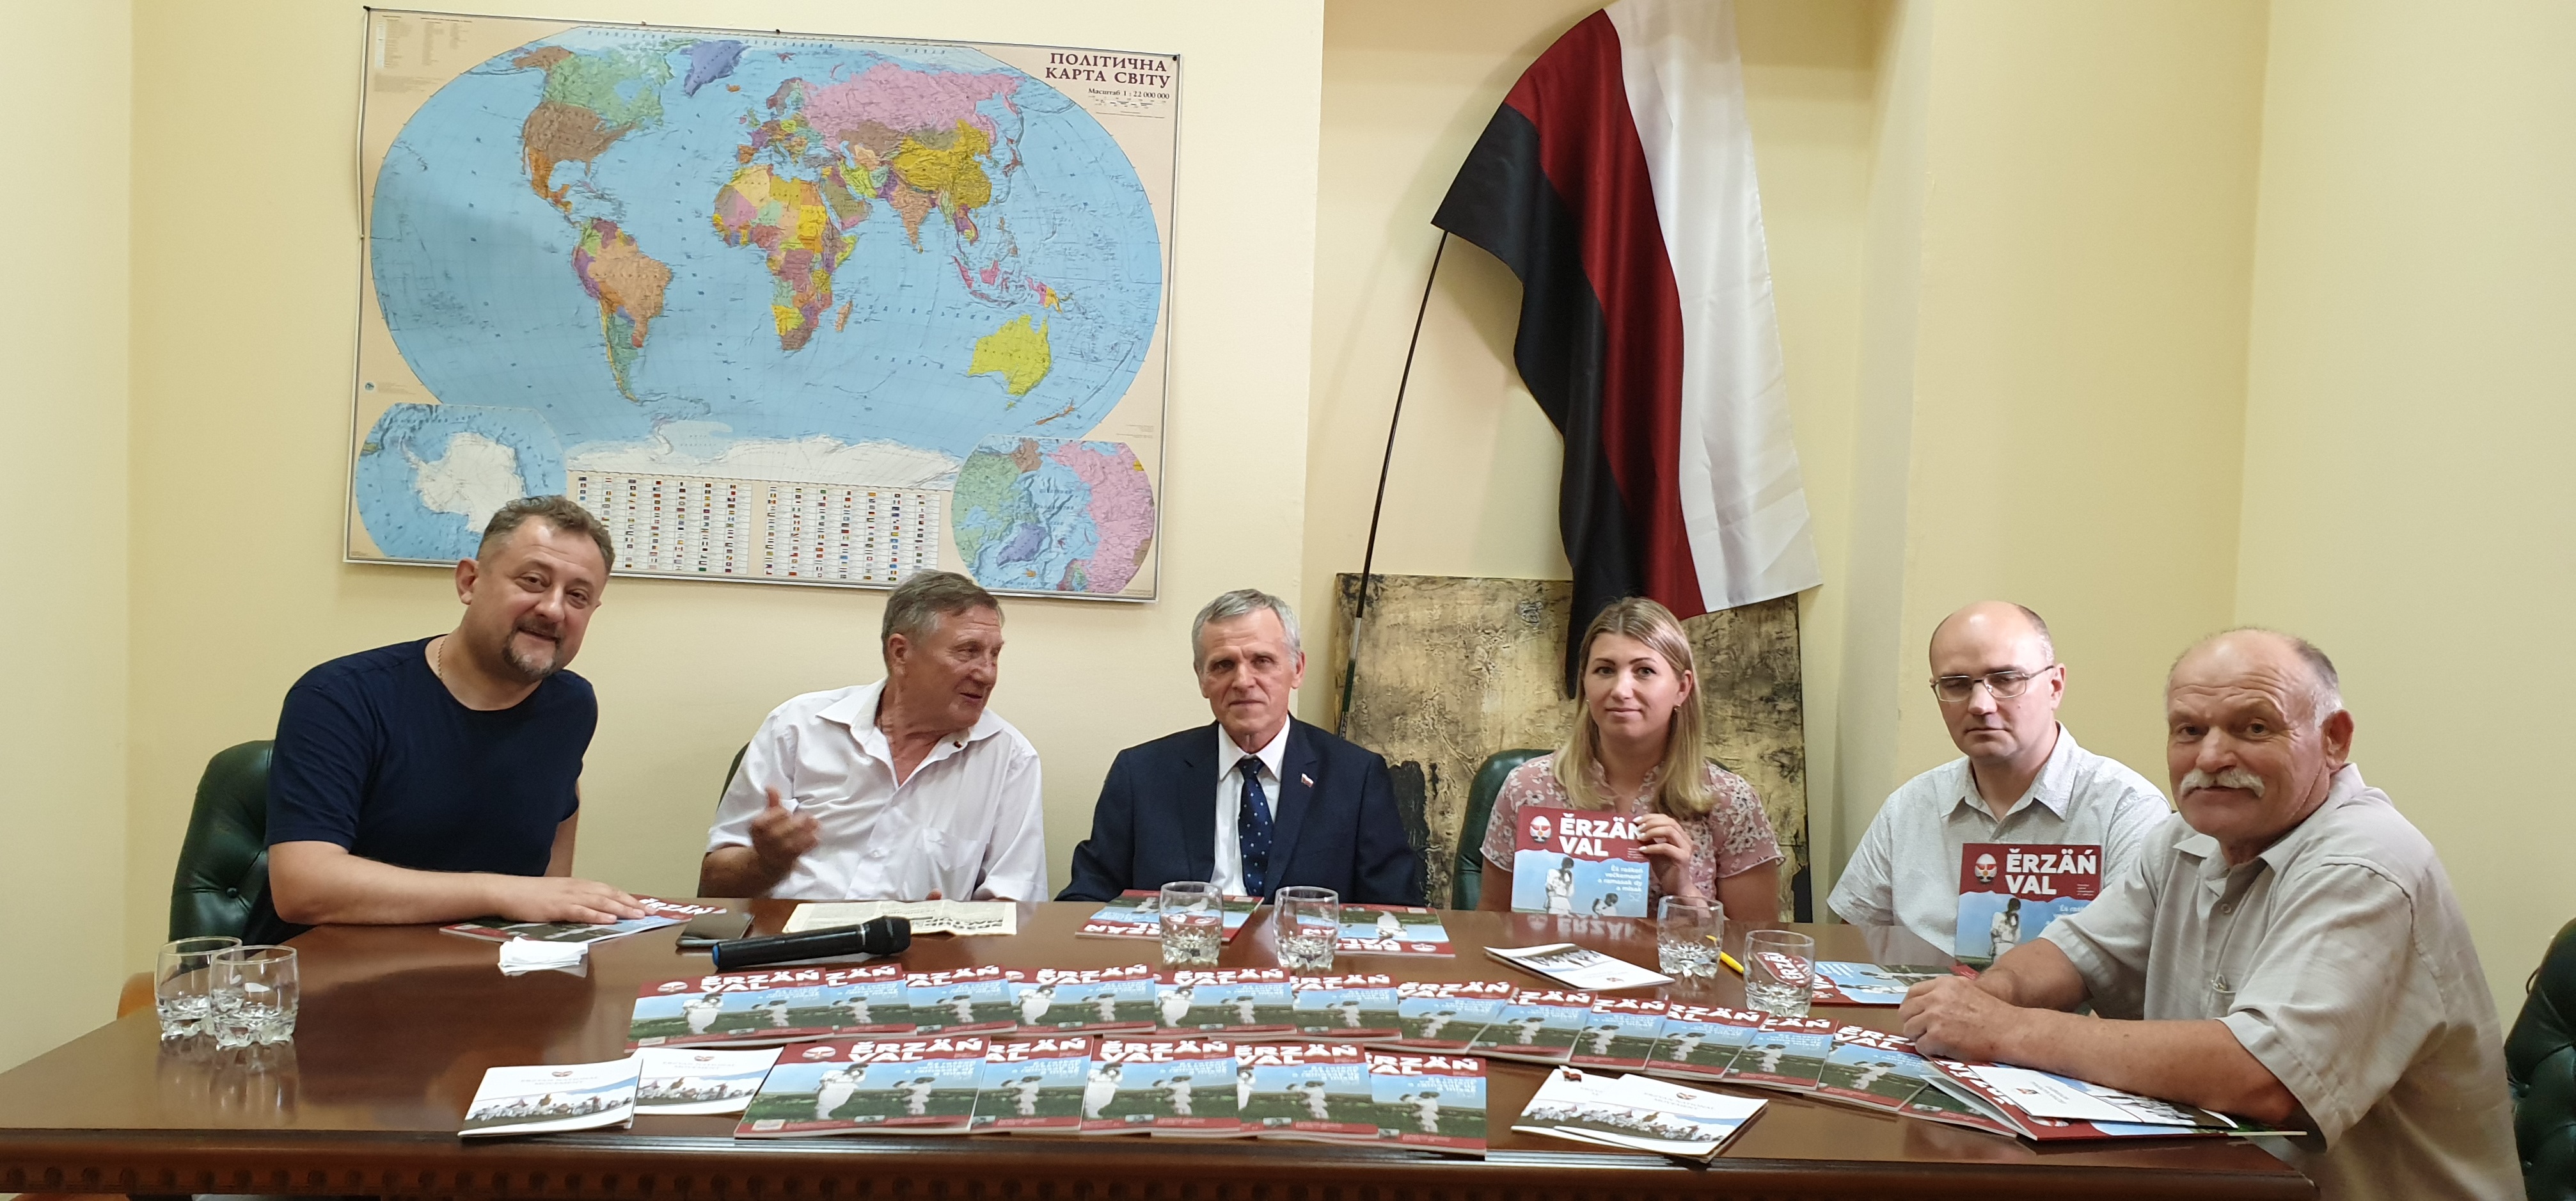 First Erzya social and political magazine was presented in Ukraine